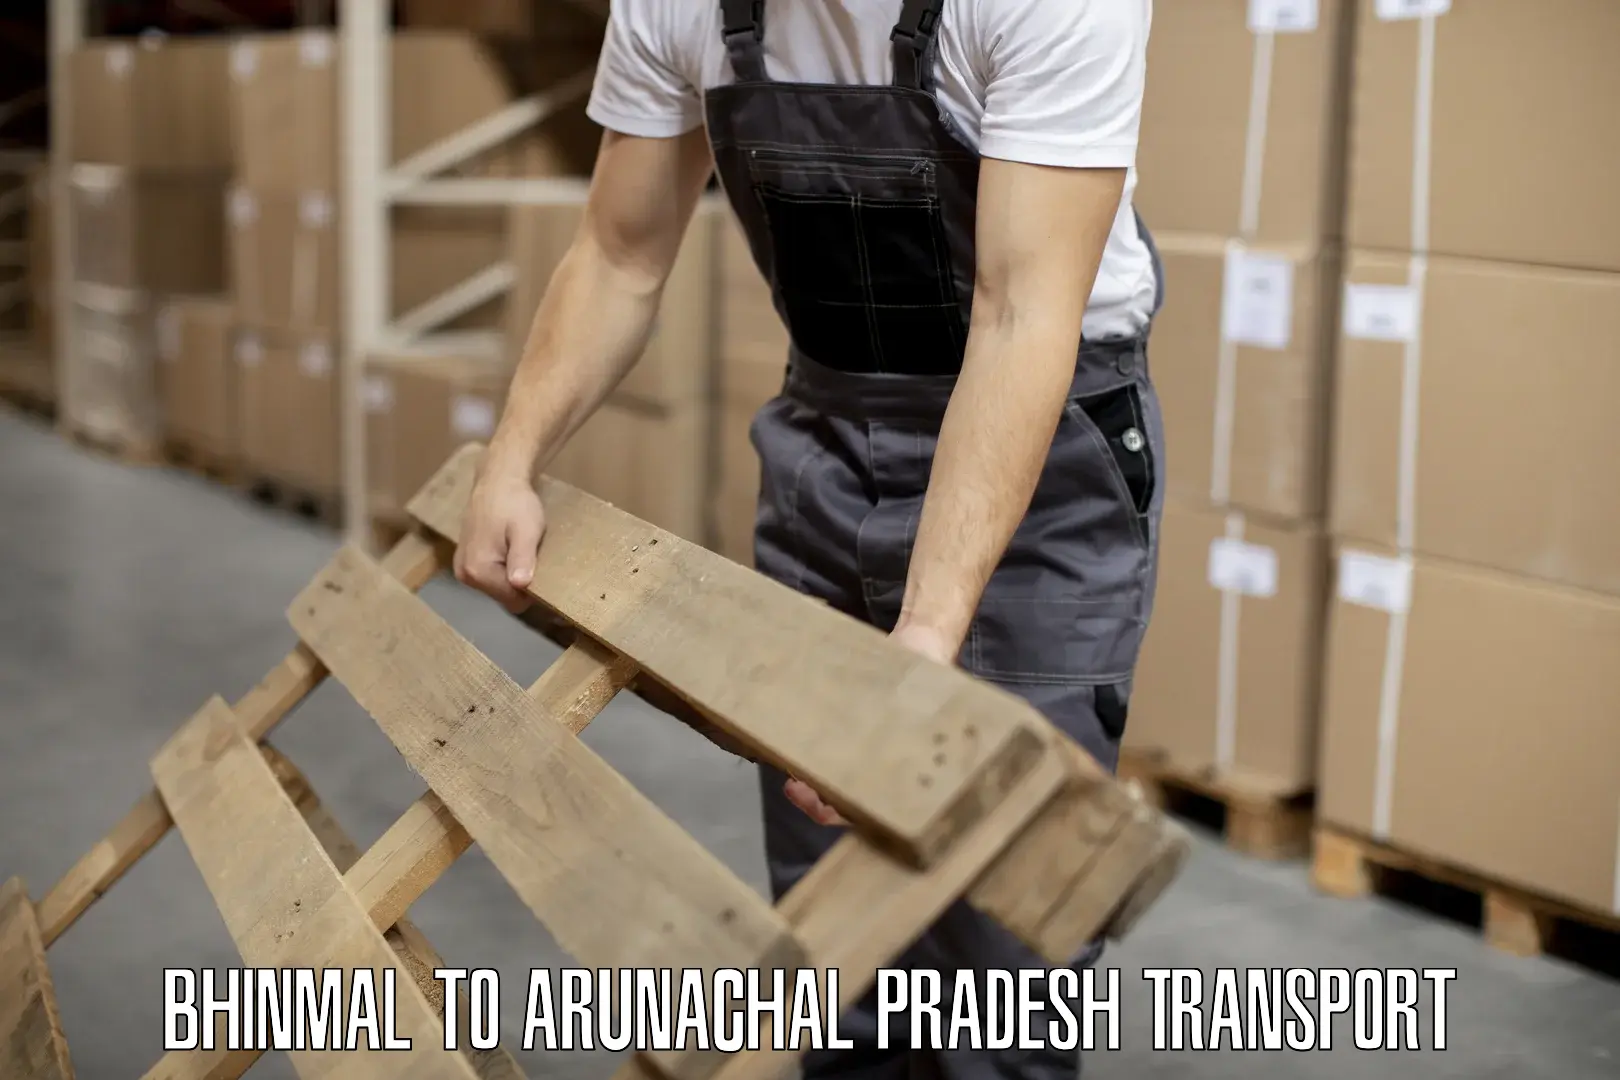 Interstate transport services Bhinmal to Deomali